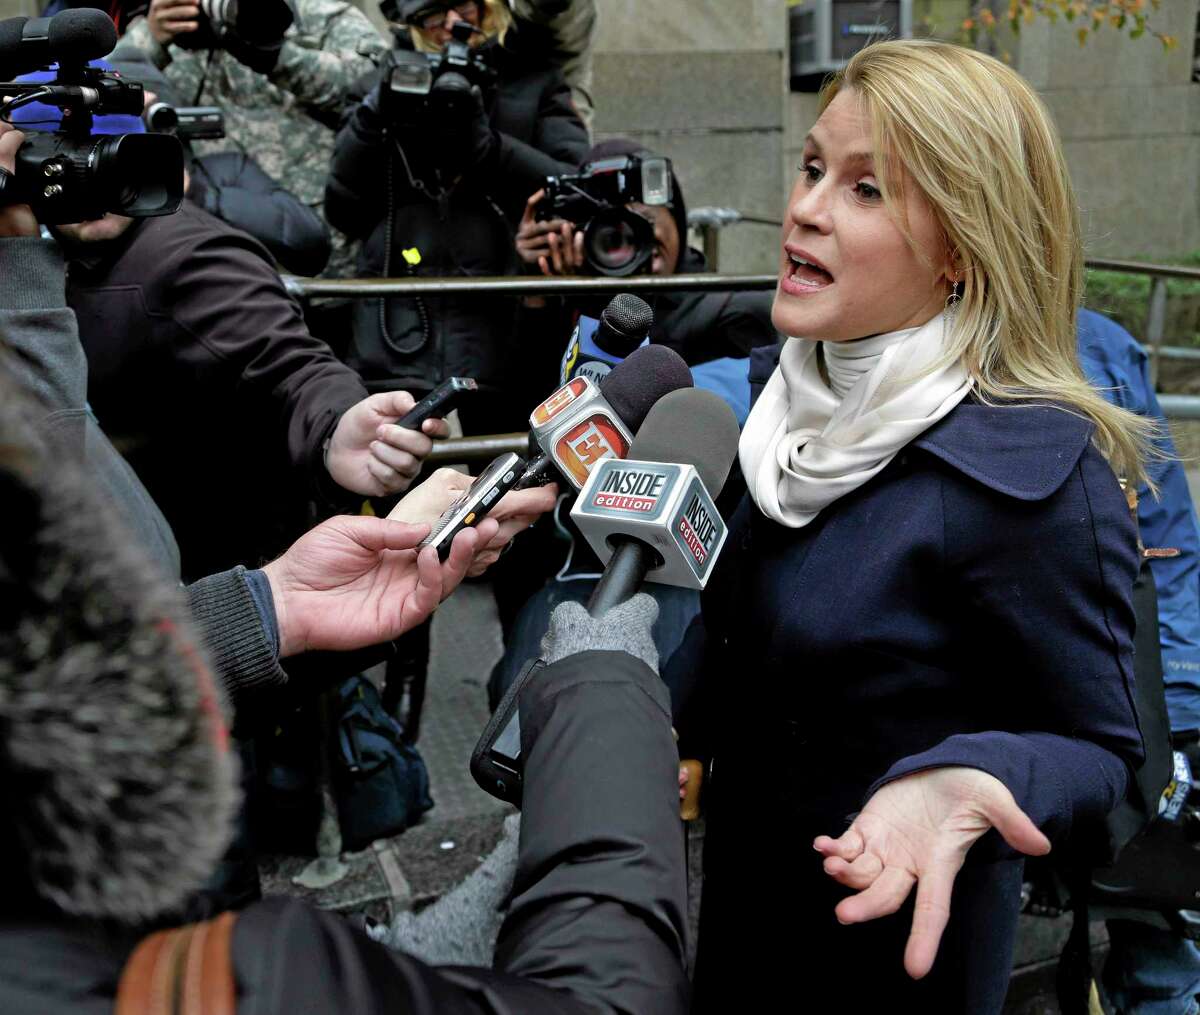 Genevieve Sabourin, who was found guilty of stalking actor Alec Baldwin, spoke with reporters earlier in the week as she arrived for her trial at criminal court in New York. (AP Photo/Seth Wenig)